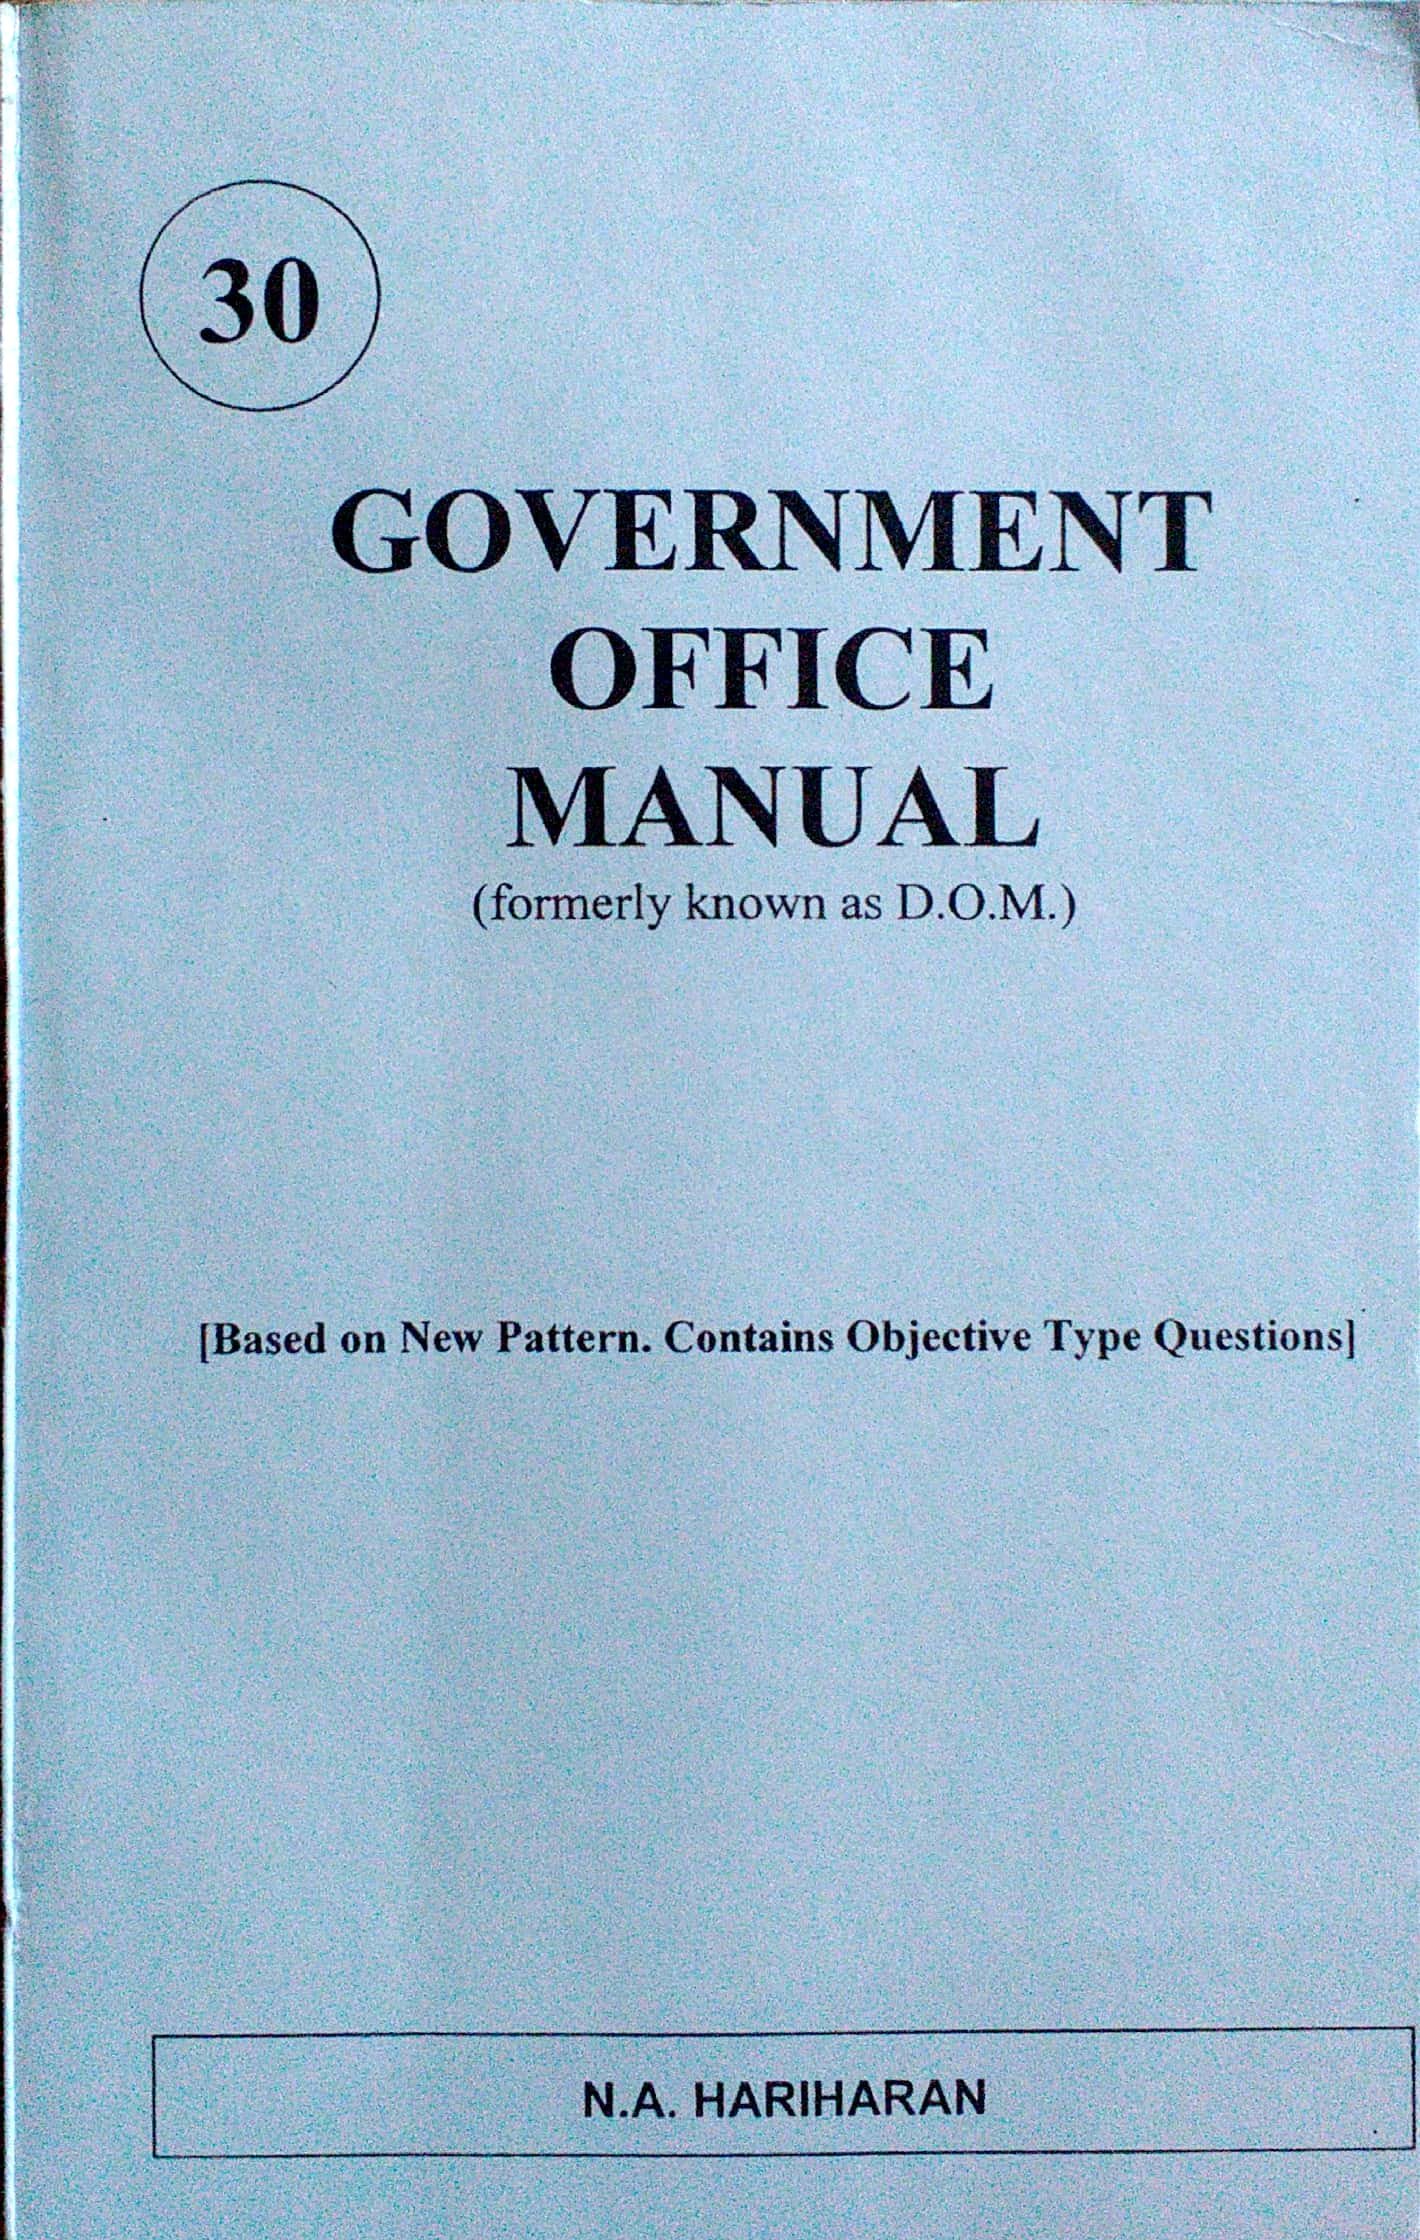 Routemybook - Buy Government Office Manual [Formerly Known as ] by   Online at Lowest Price in India